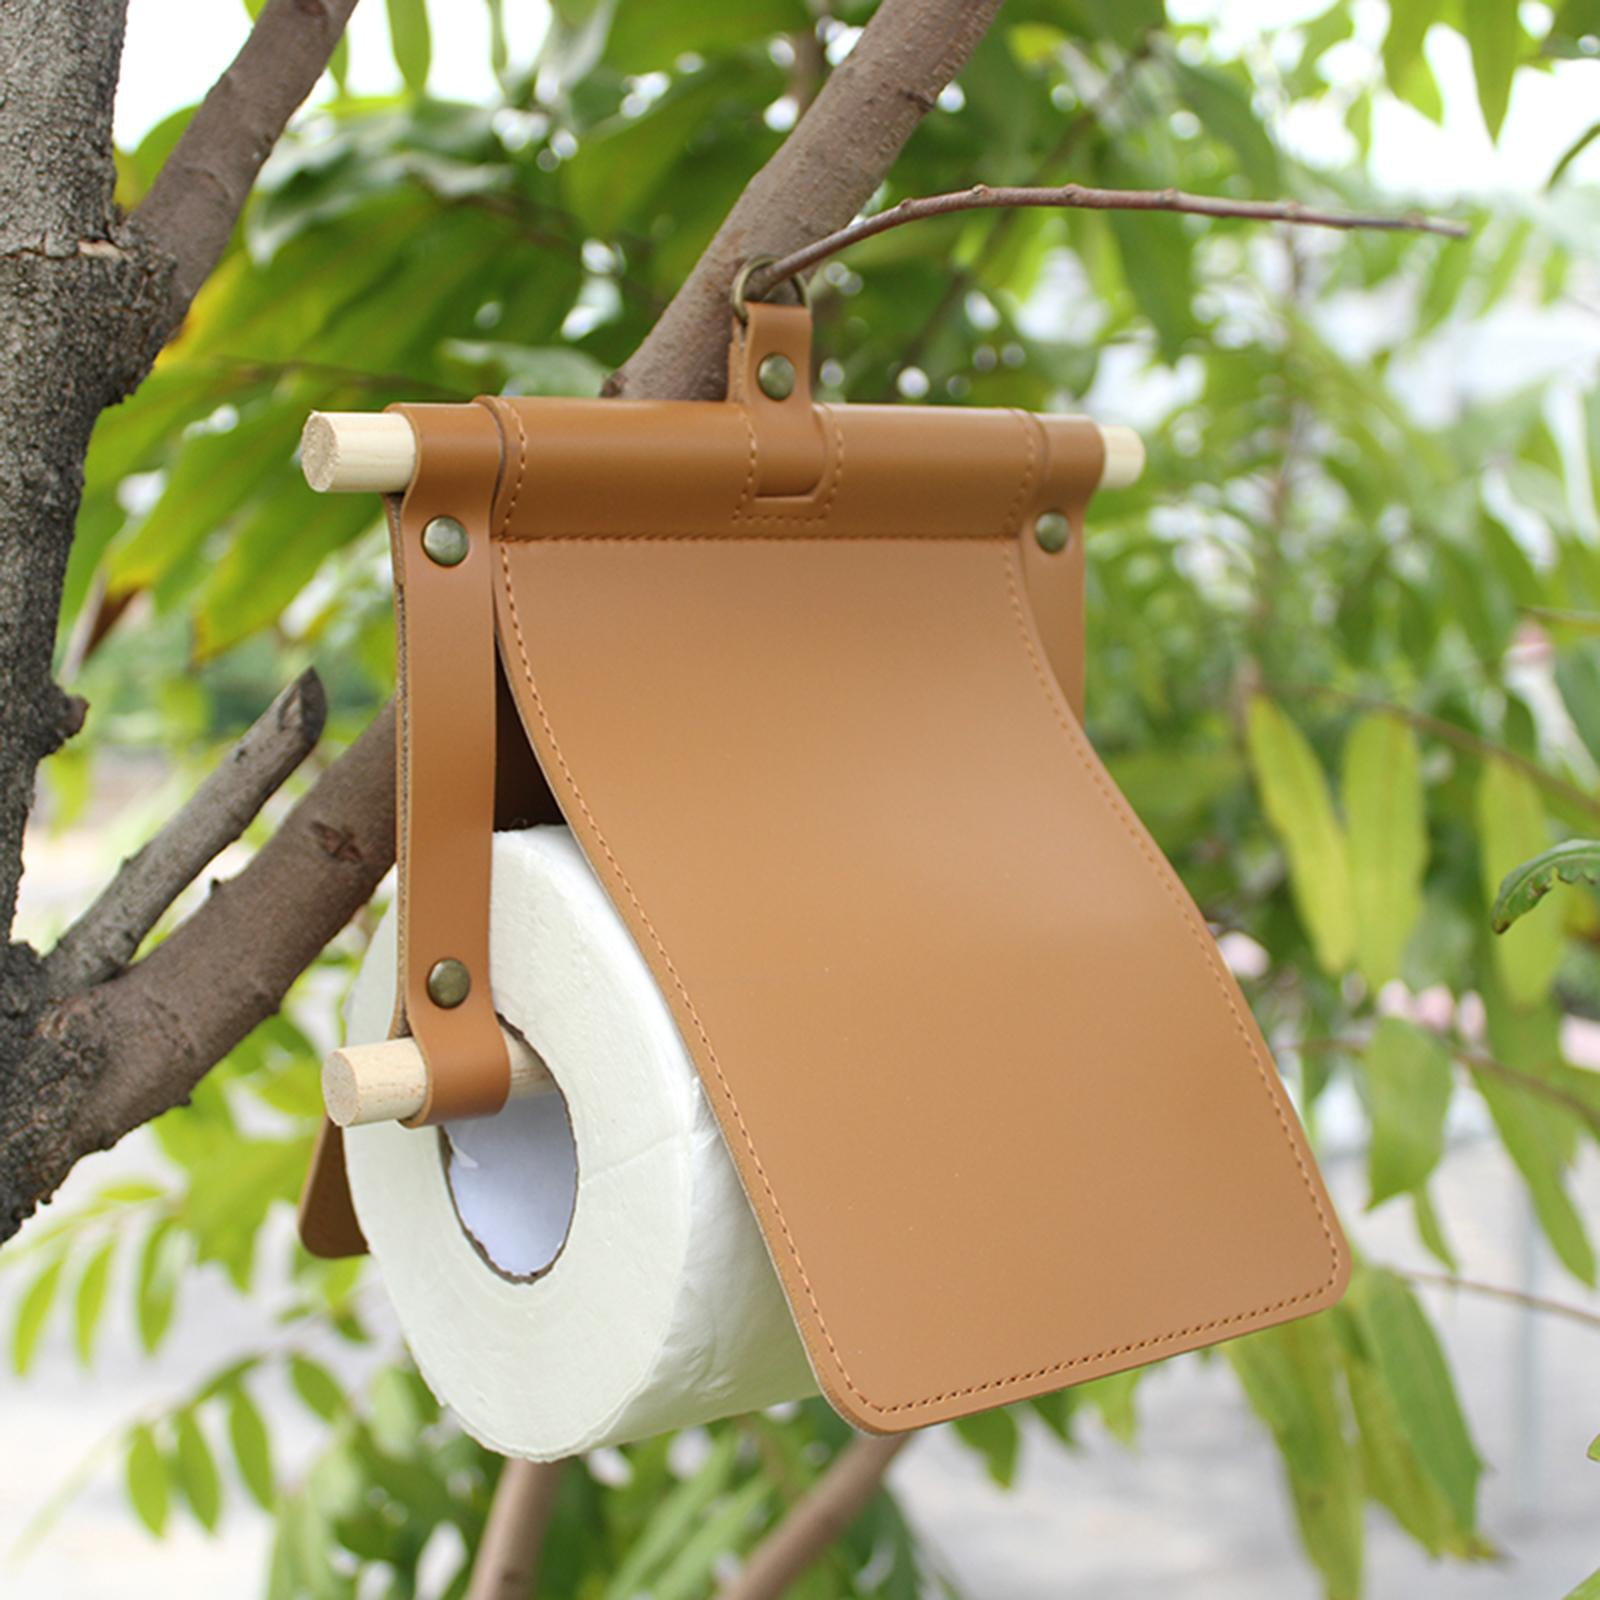 TAKE A ROLL outdoor paper towel holder